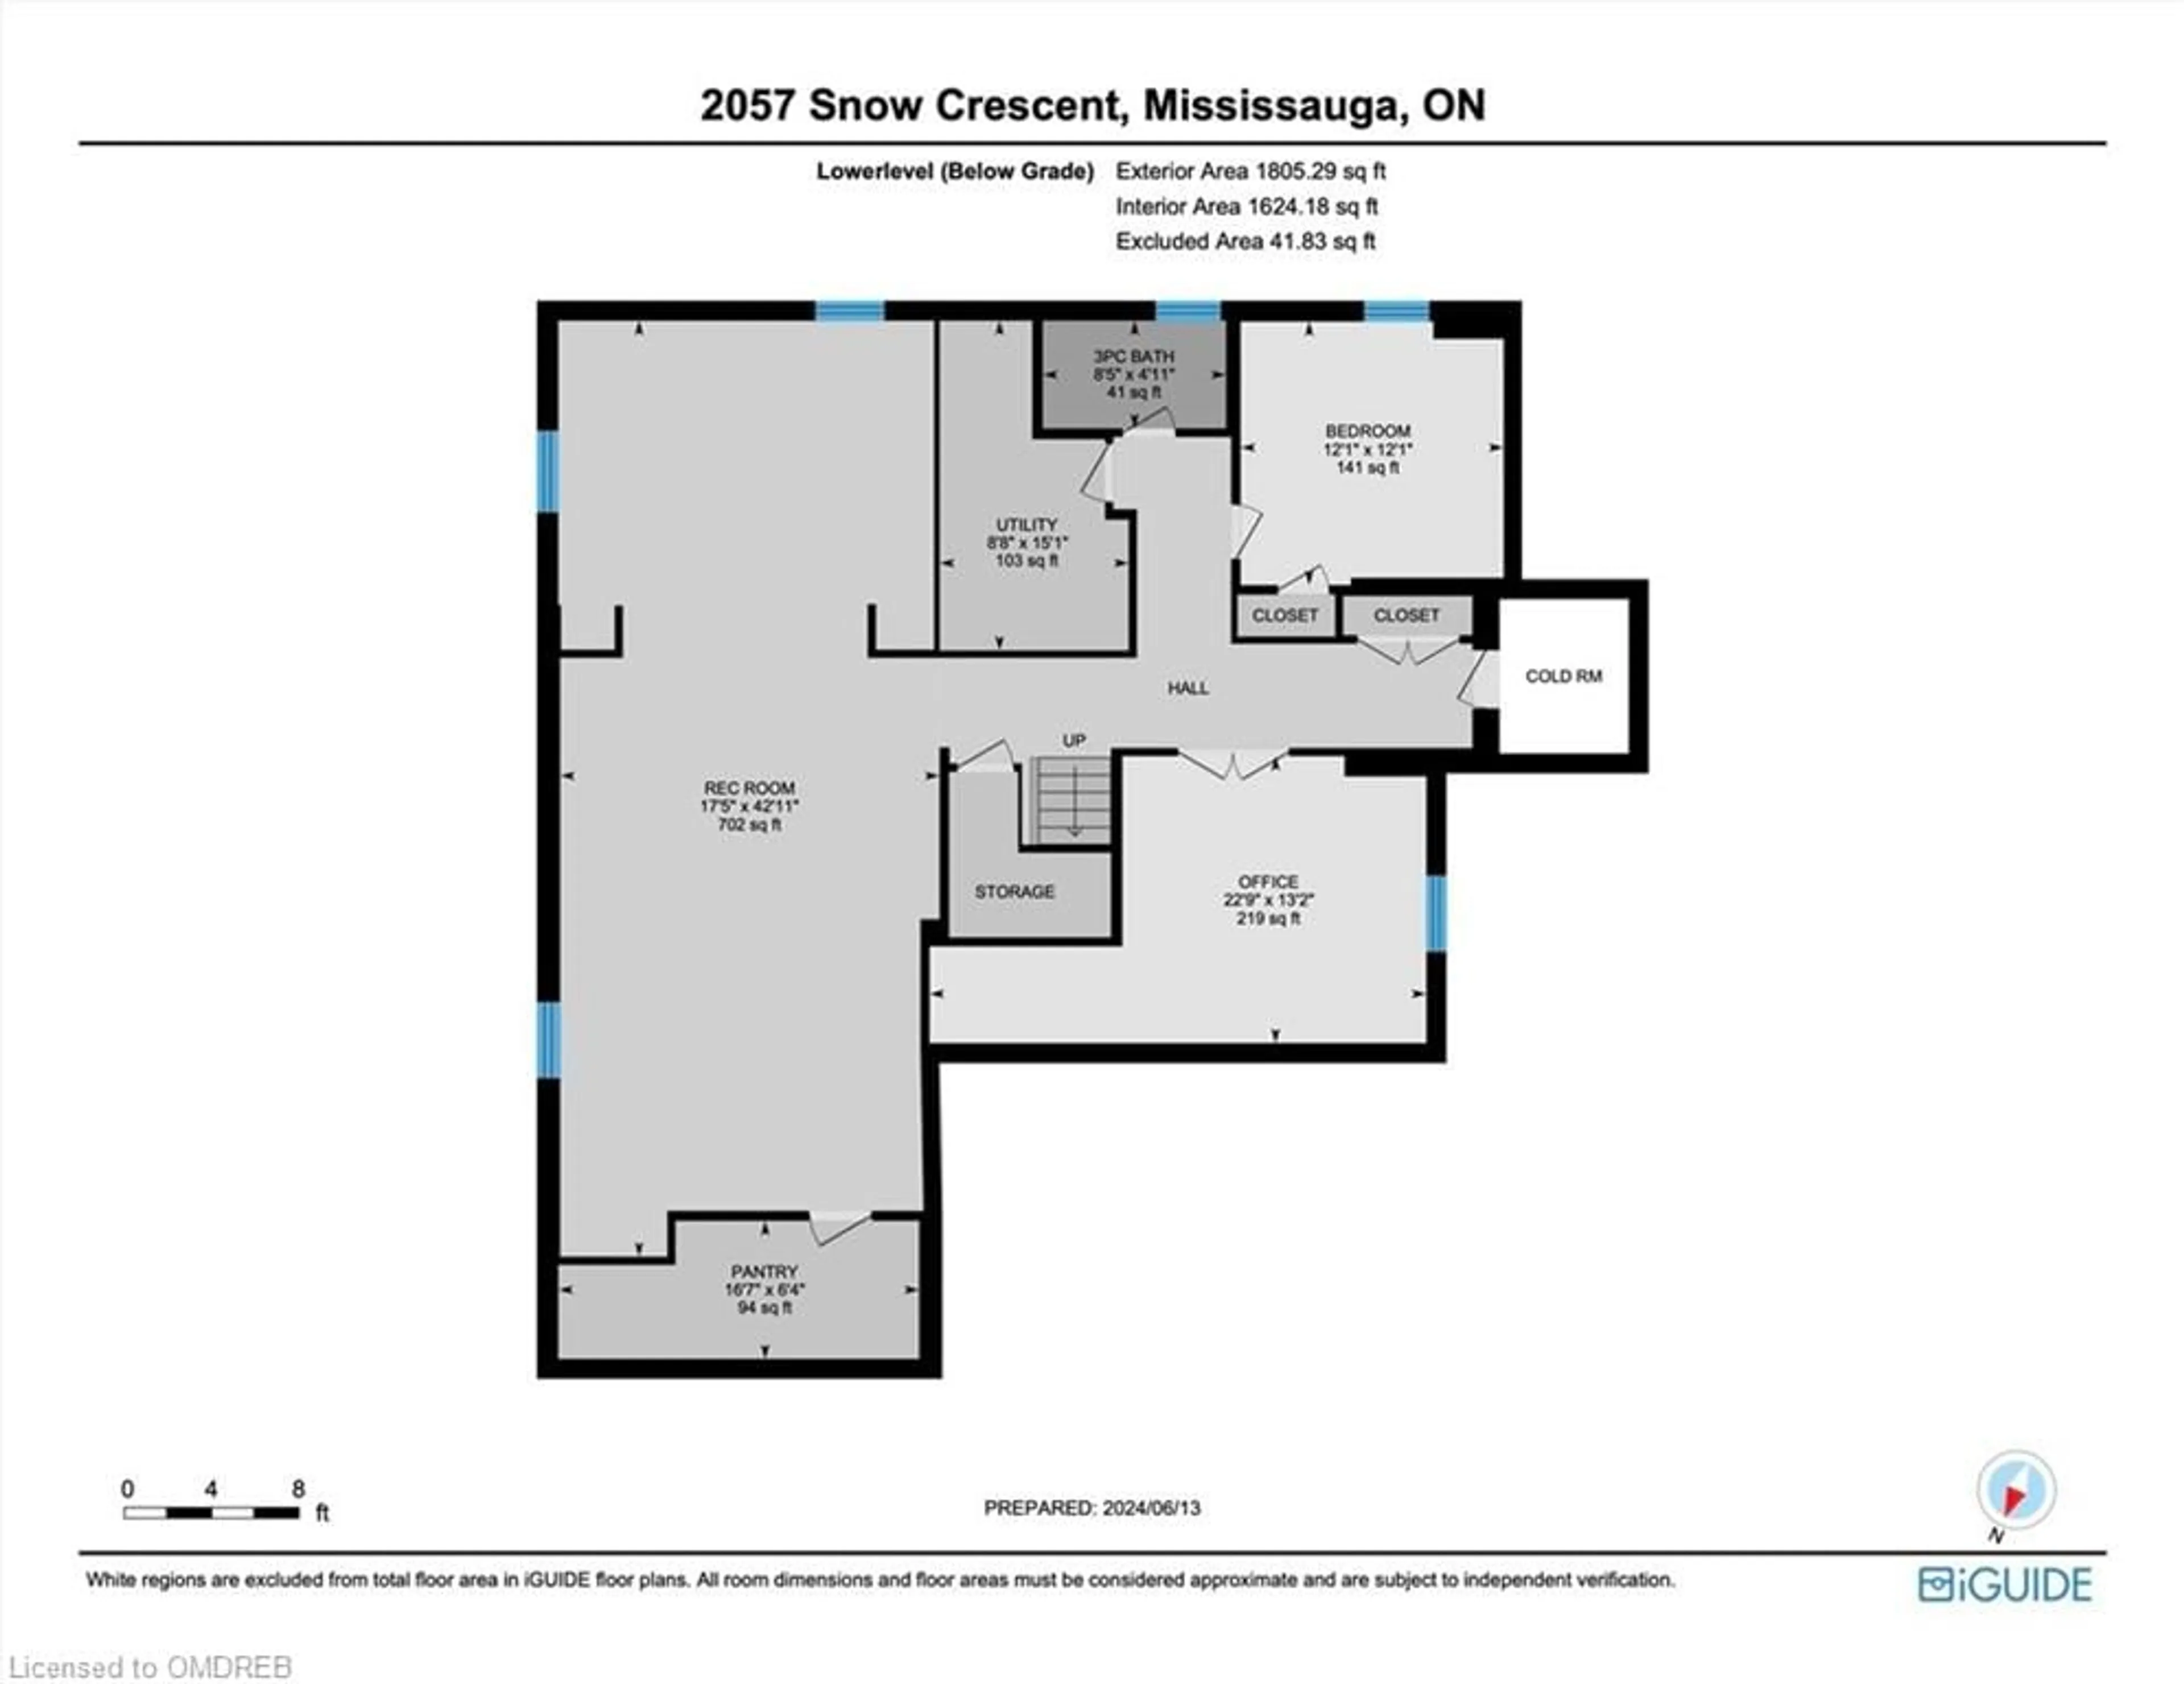 Floor plan for 2057 Snow Cres, Mississauga Ontario L4Y 1T3